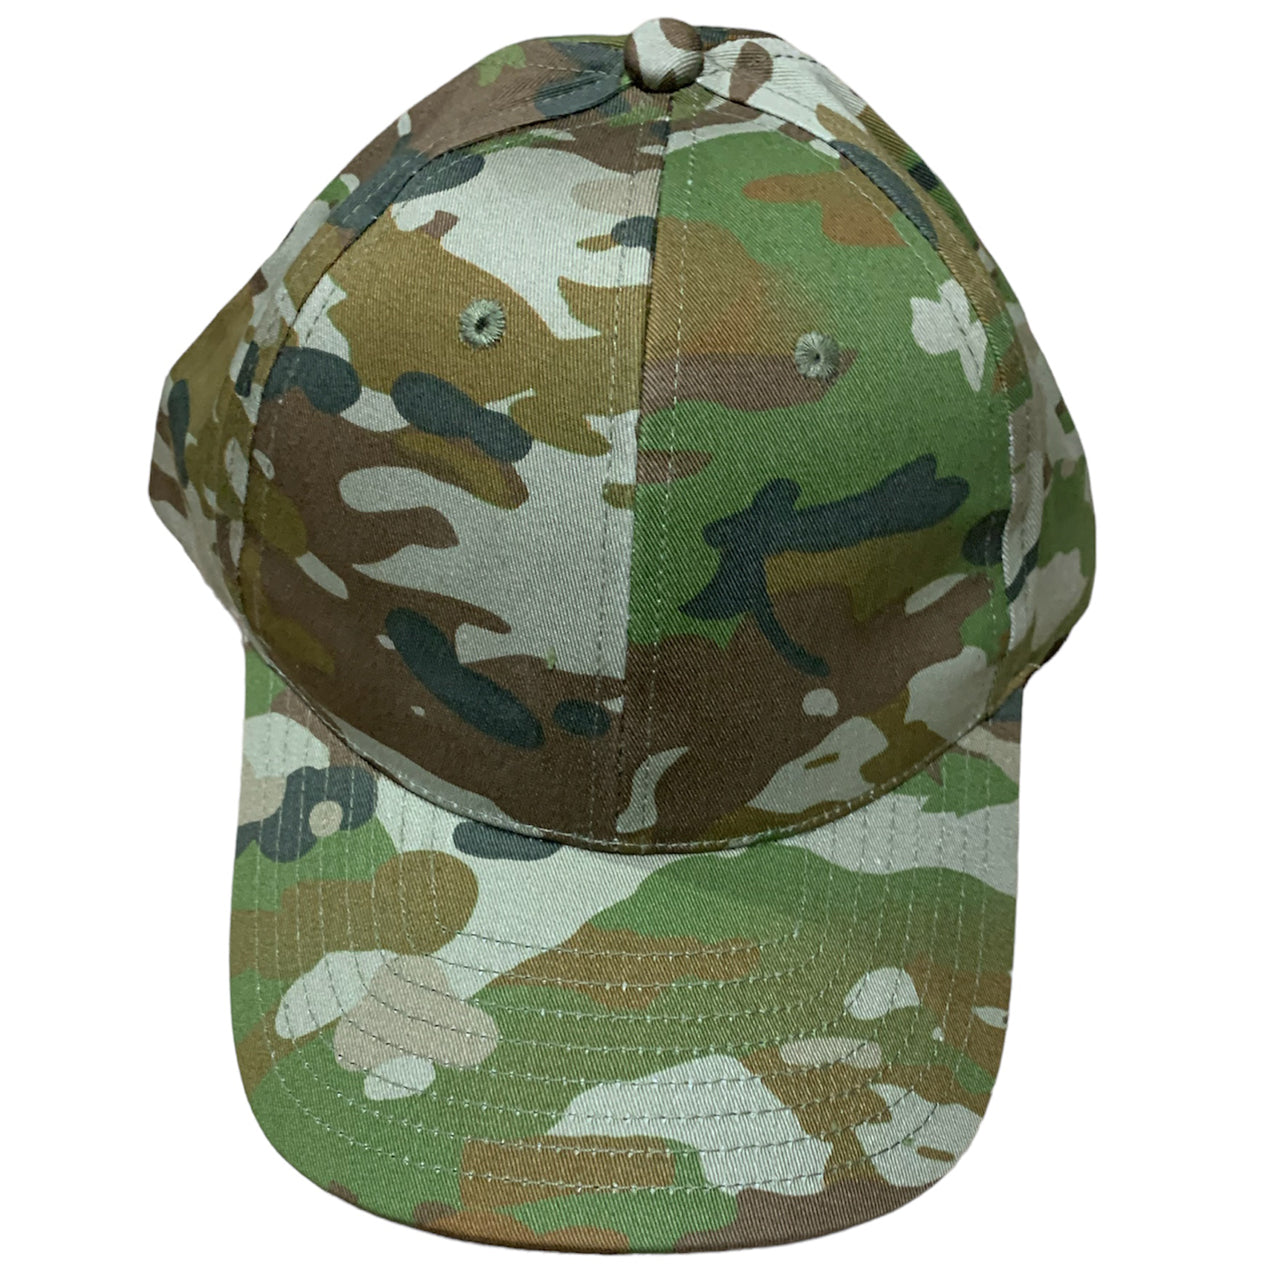 Experience the ultimate in comfort and style with the Army Australian Multicam Baseball Cap. This cap features an adjustable hook & loop back for a perfect fit, making it a One Size Fits All option. Upgrade your headwear game with this versatile and trendy cap! www.defenceqstore.com.au top view